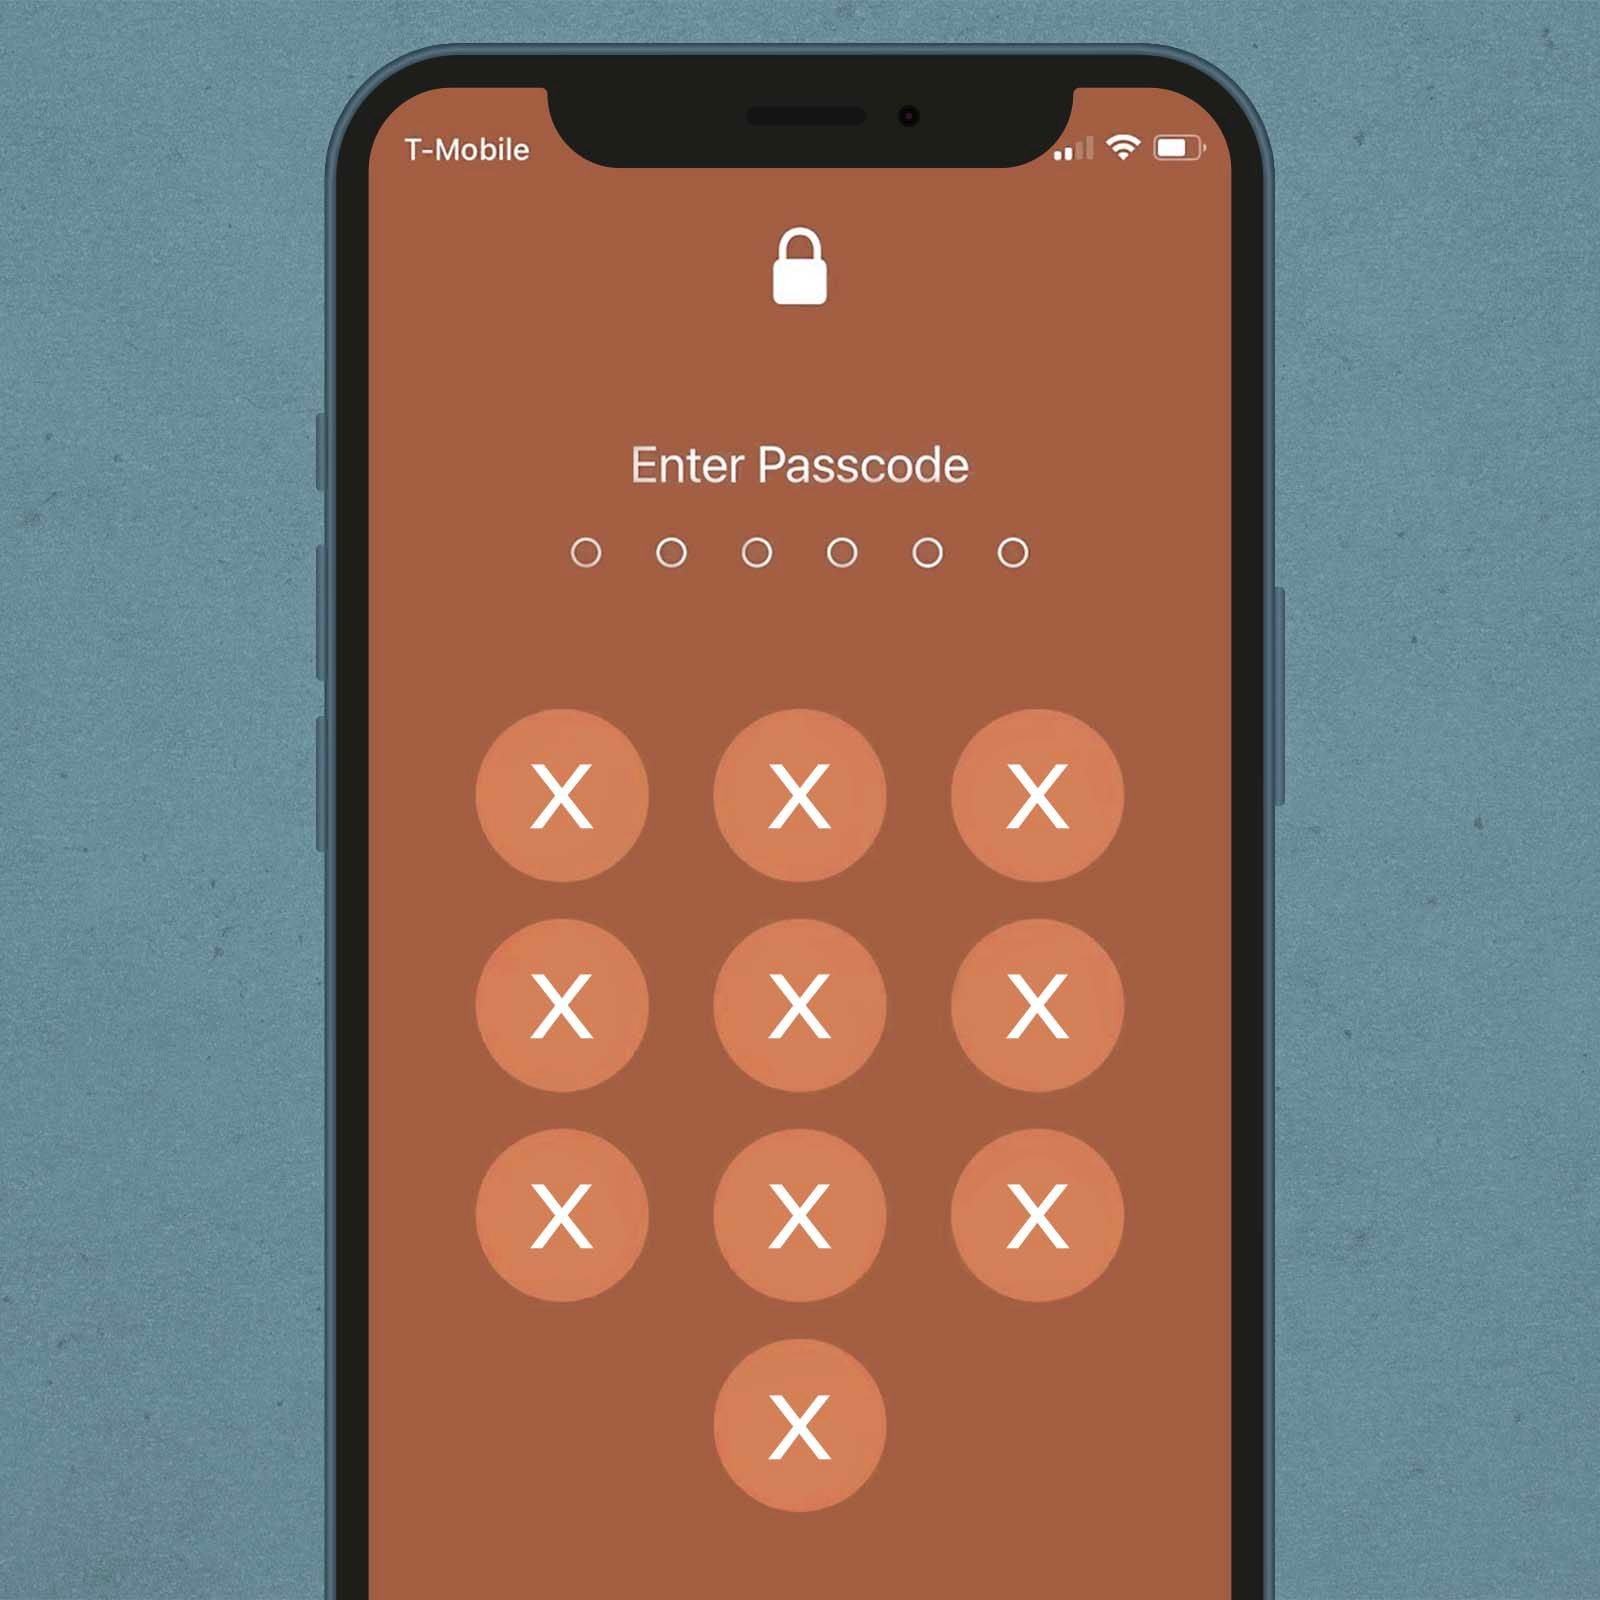 how-to-unlock-iphone-without-password-without-losing-data